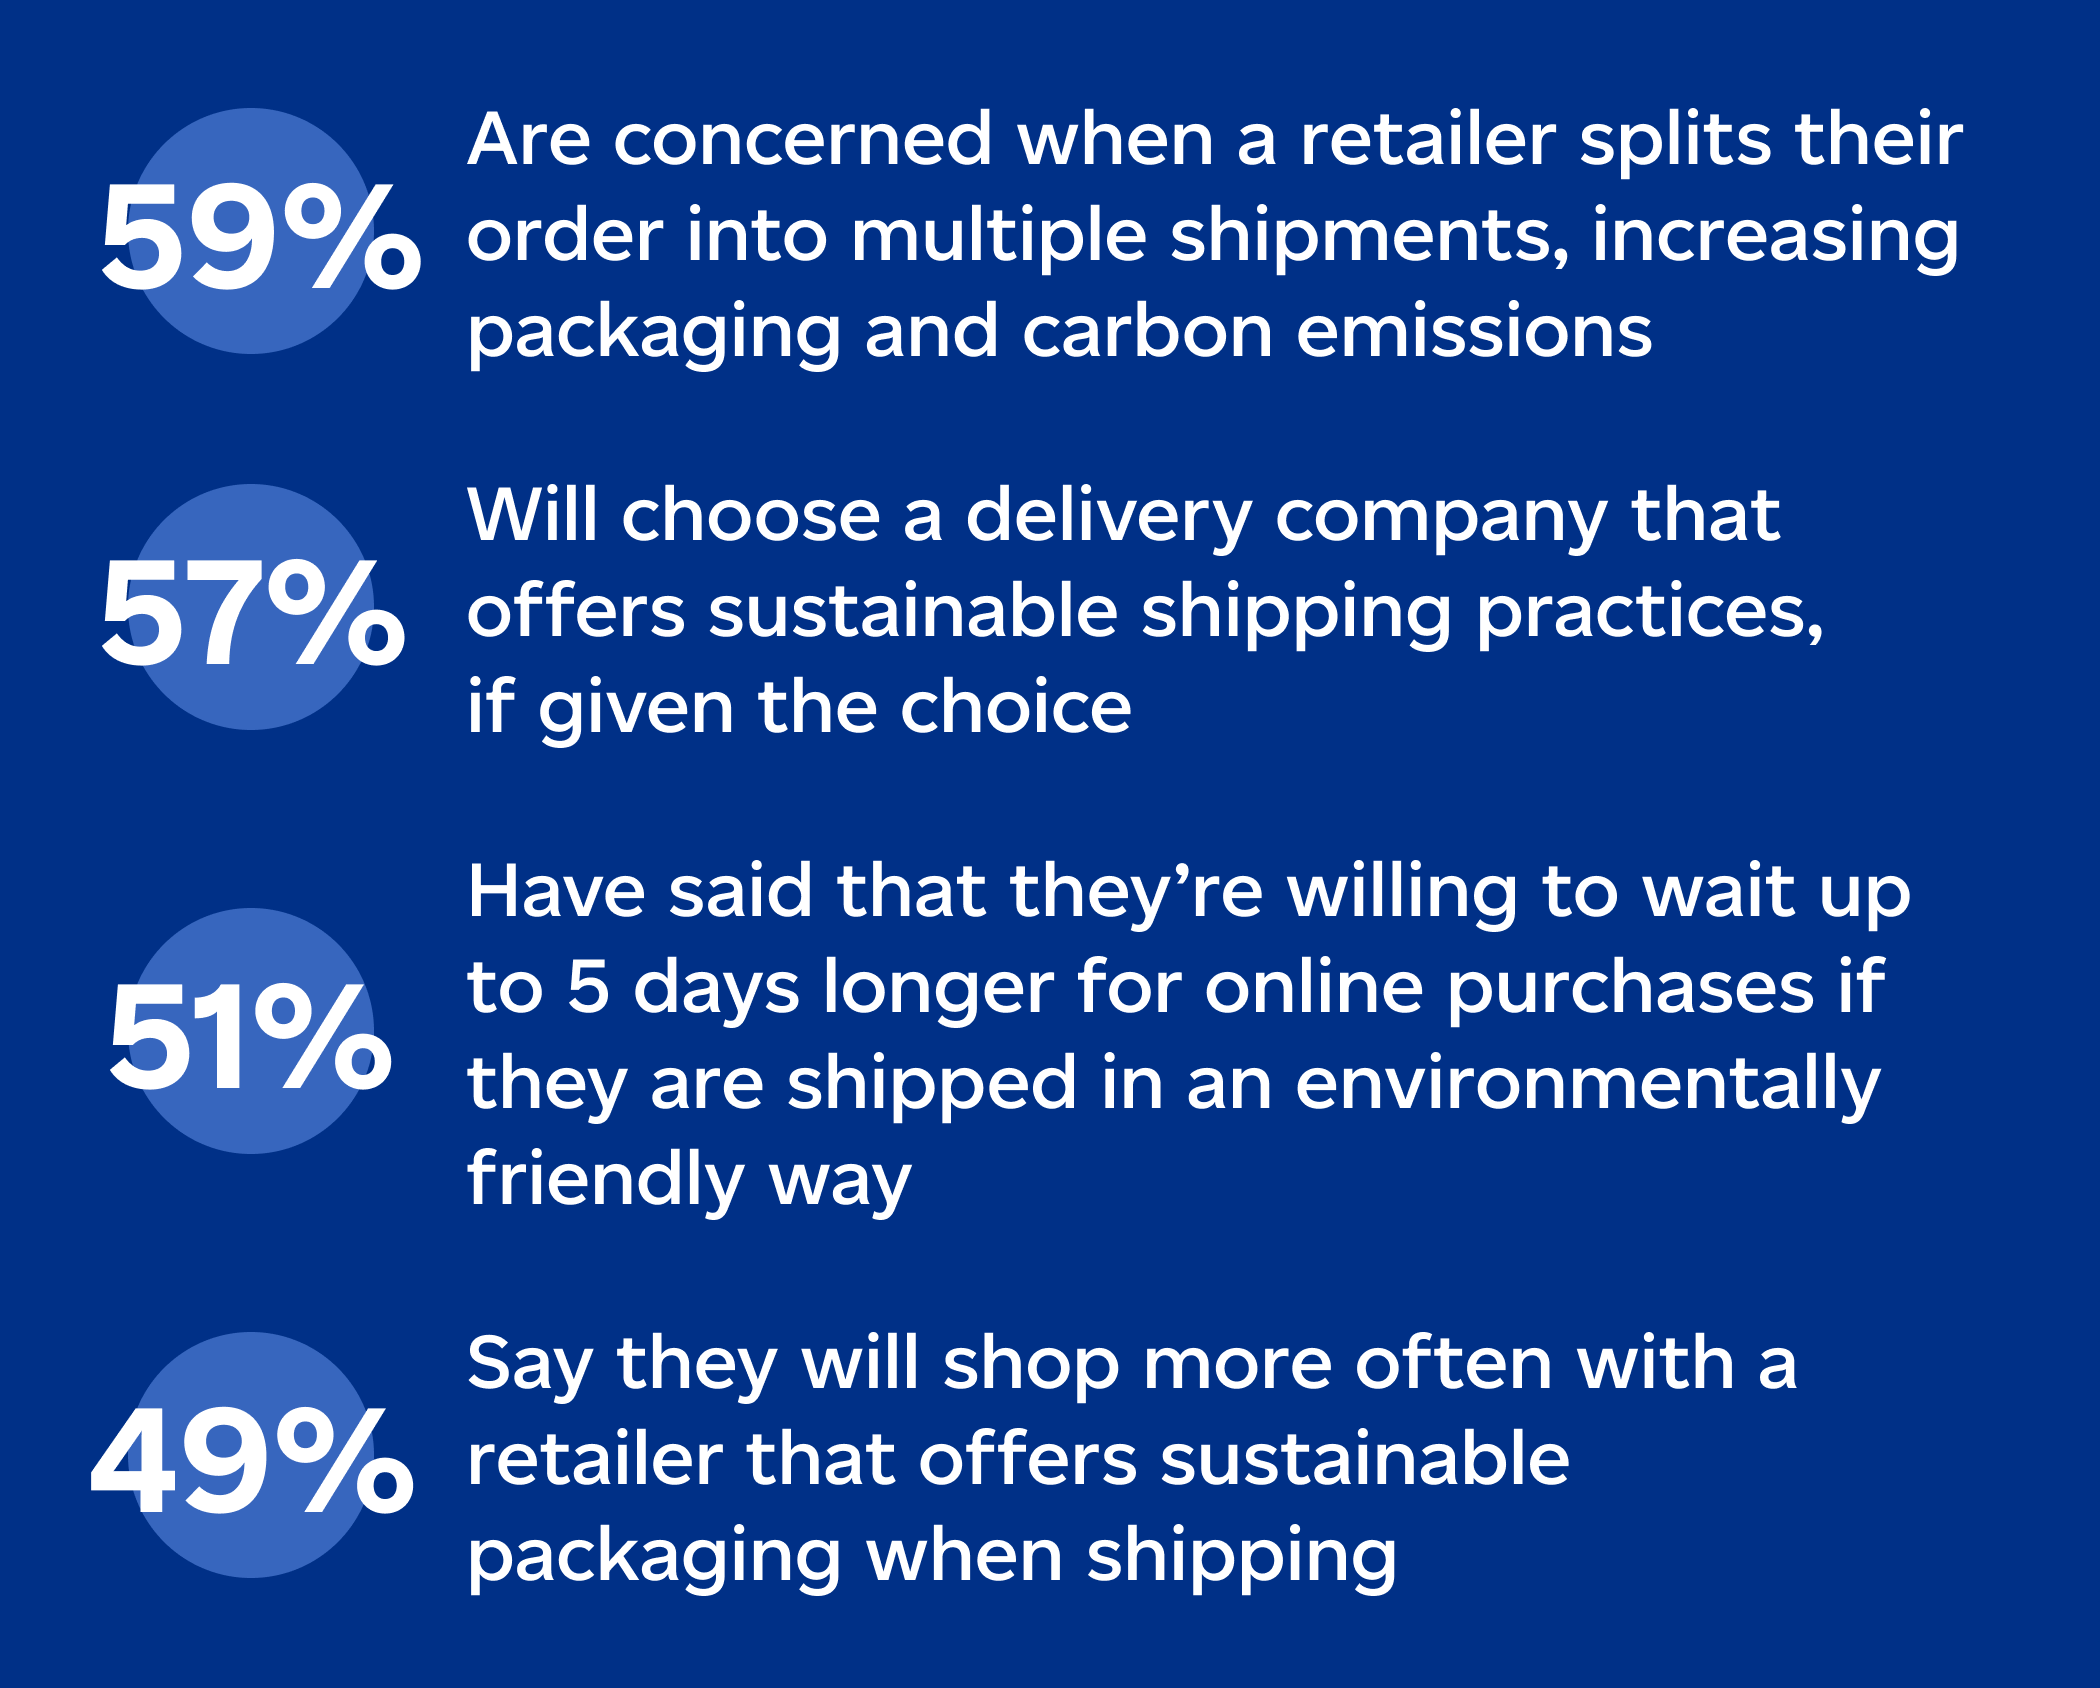 Consider aligning your shipping and packaging practices with those of the shoppers you’re trying to reach and convert: 59% are concerned when a retailer splits their order into multiple shipments, increasing packaging and carbon emissions; 57% will choose a delivery company that offers sustainable shipping practices, if given the choice; 51% have said that they’re willing to wait up to 5 days longer for online purchases if they are shipped in an environmentally friendly way; 49% say they will shop more often with a retailer that offers sustainable packaging when shipping. Statistics courtesy of Canada Post, Fall Omnibus Report, November 2022. 